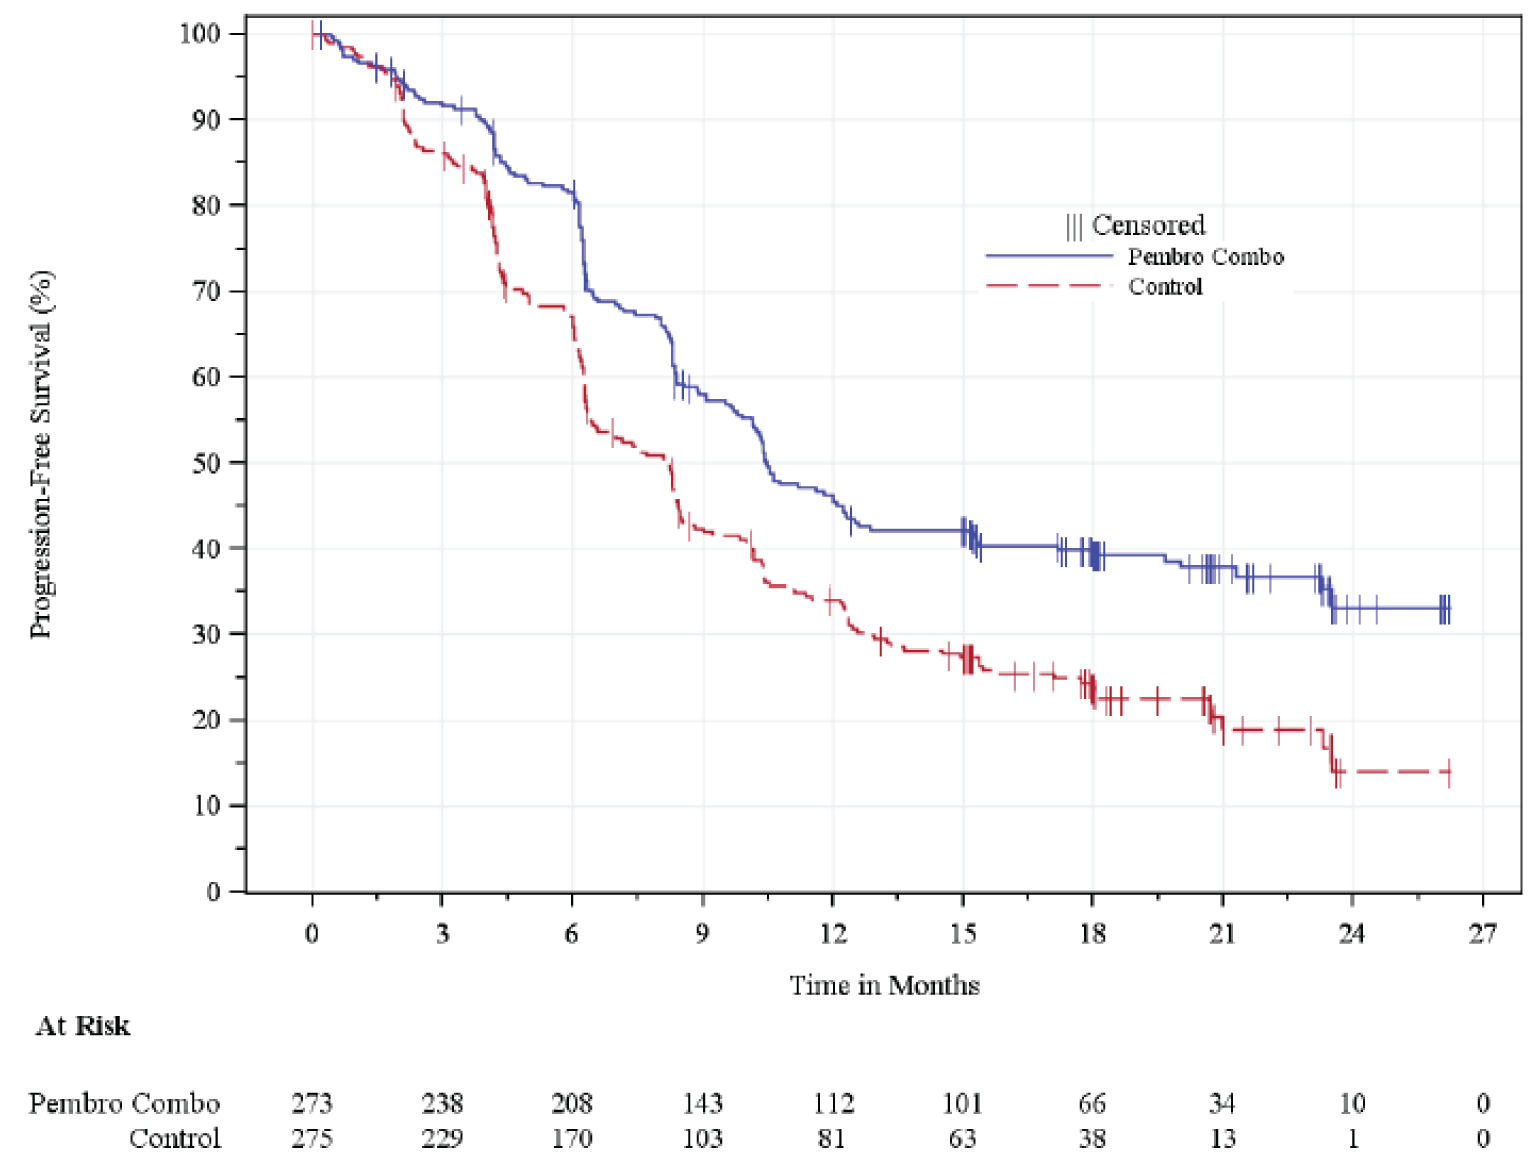 The figure shows the PFS Kaplan-Meier curve for the pembrolizumab plus SOC arm and the placebo plus SOC arm. The survival curves separate with the pembrolizumab plus SOC arm above the placebo plus SOC arm around 2 months into the trial and remain separated throughout.